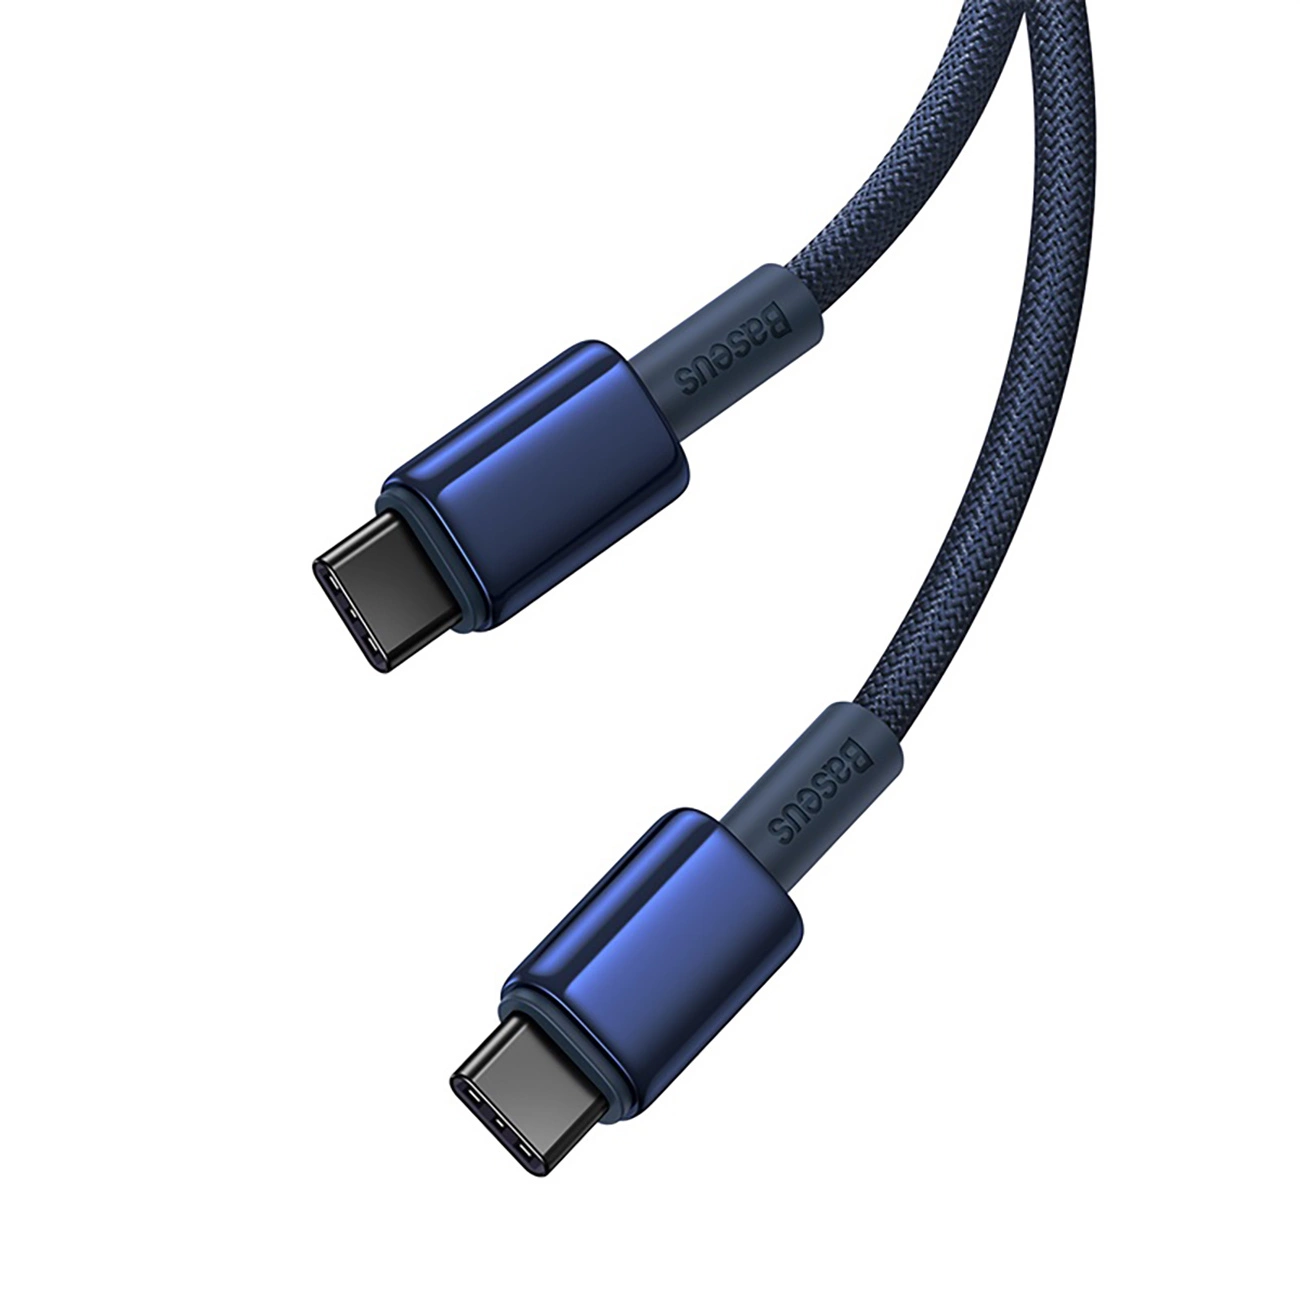 Baseus Tungsten Gold cable with USB-C / USB-C connectors with a power of up to 100W and a length of 1 m on a white background